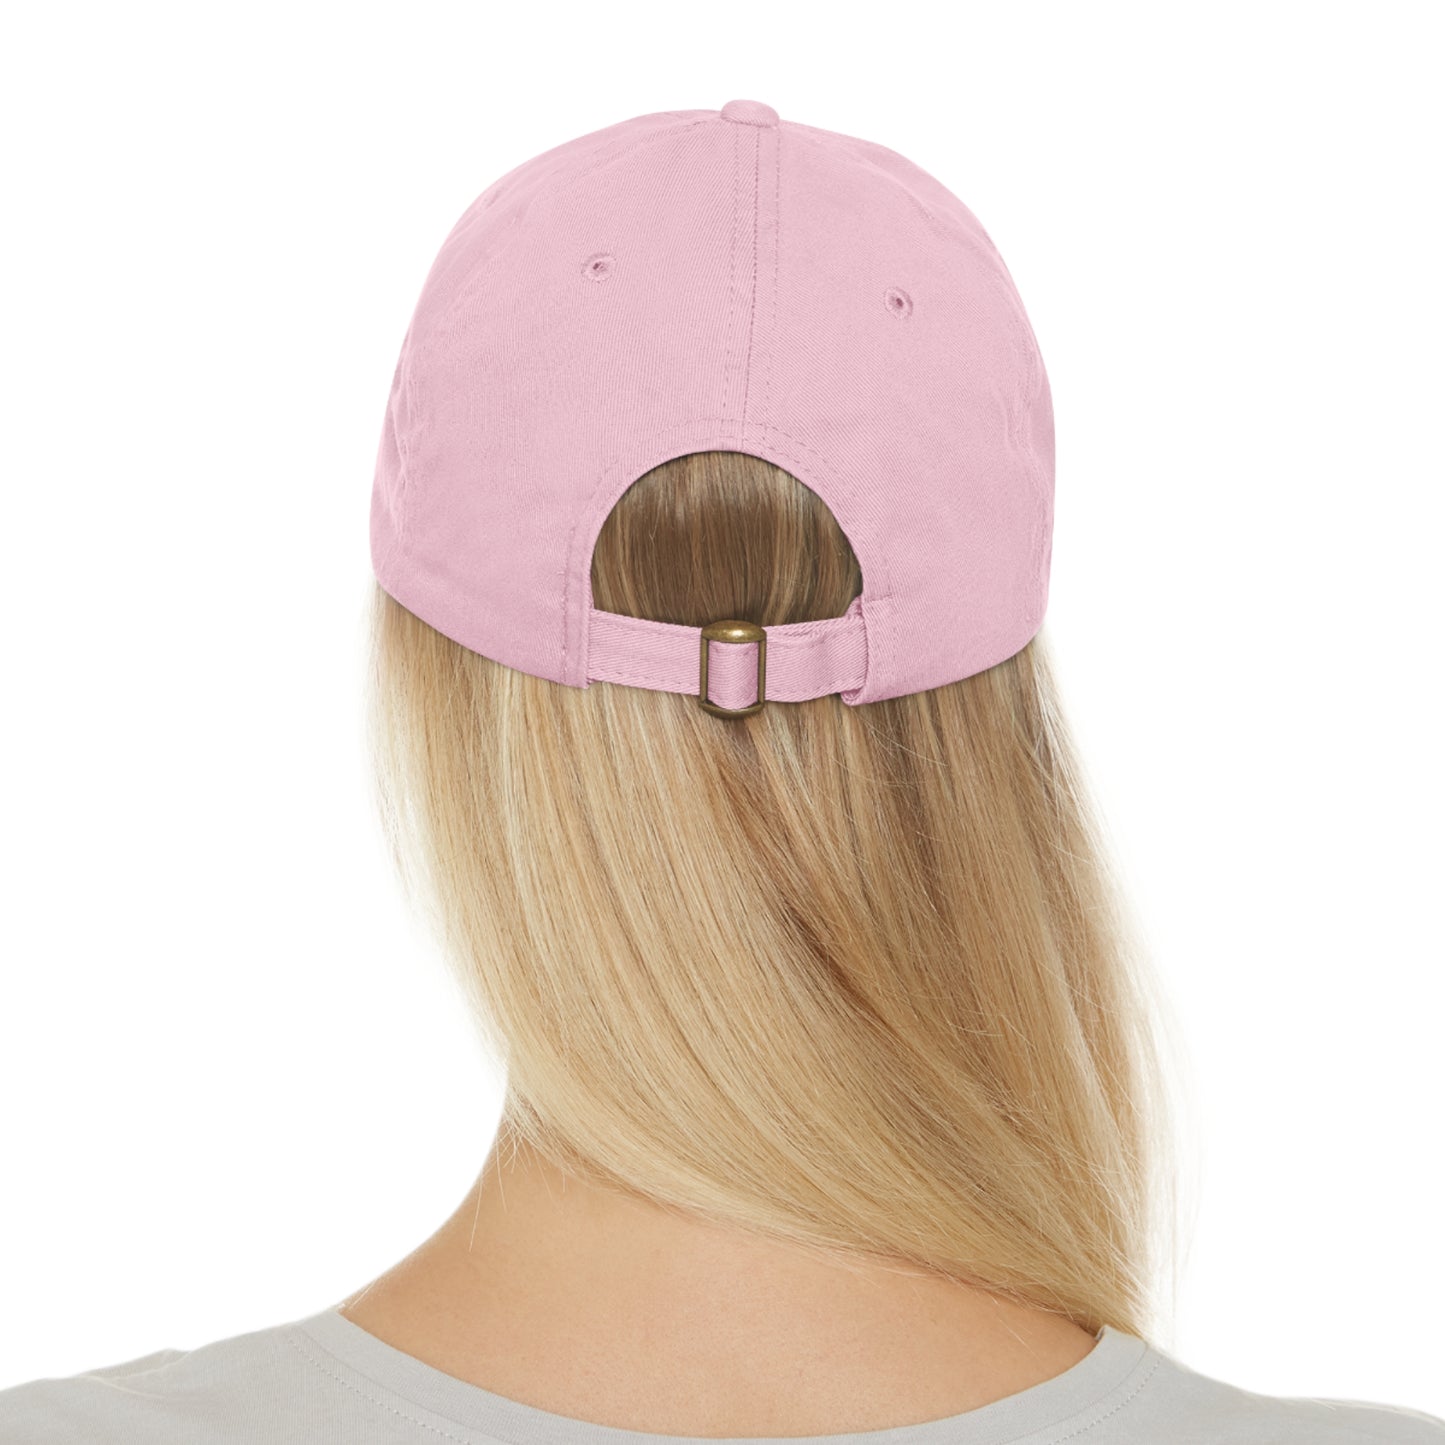 YHWH Dad Hat with Leather Patch